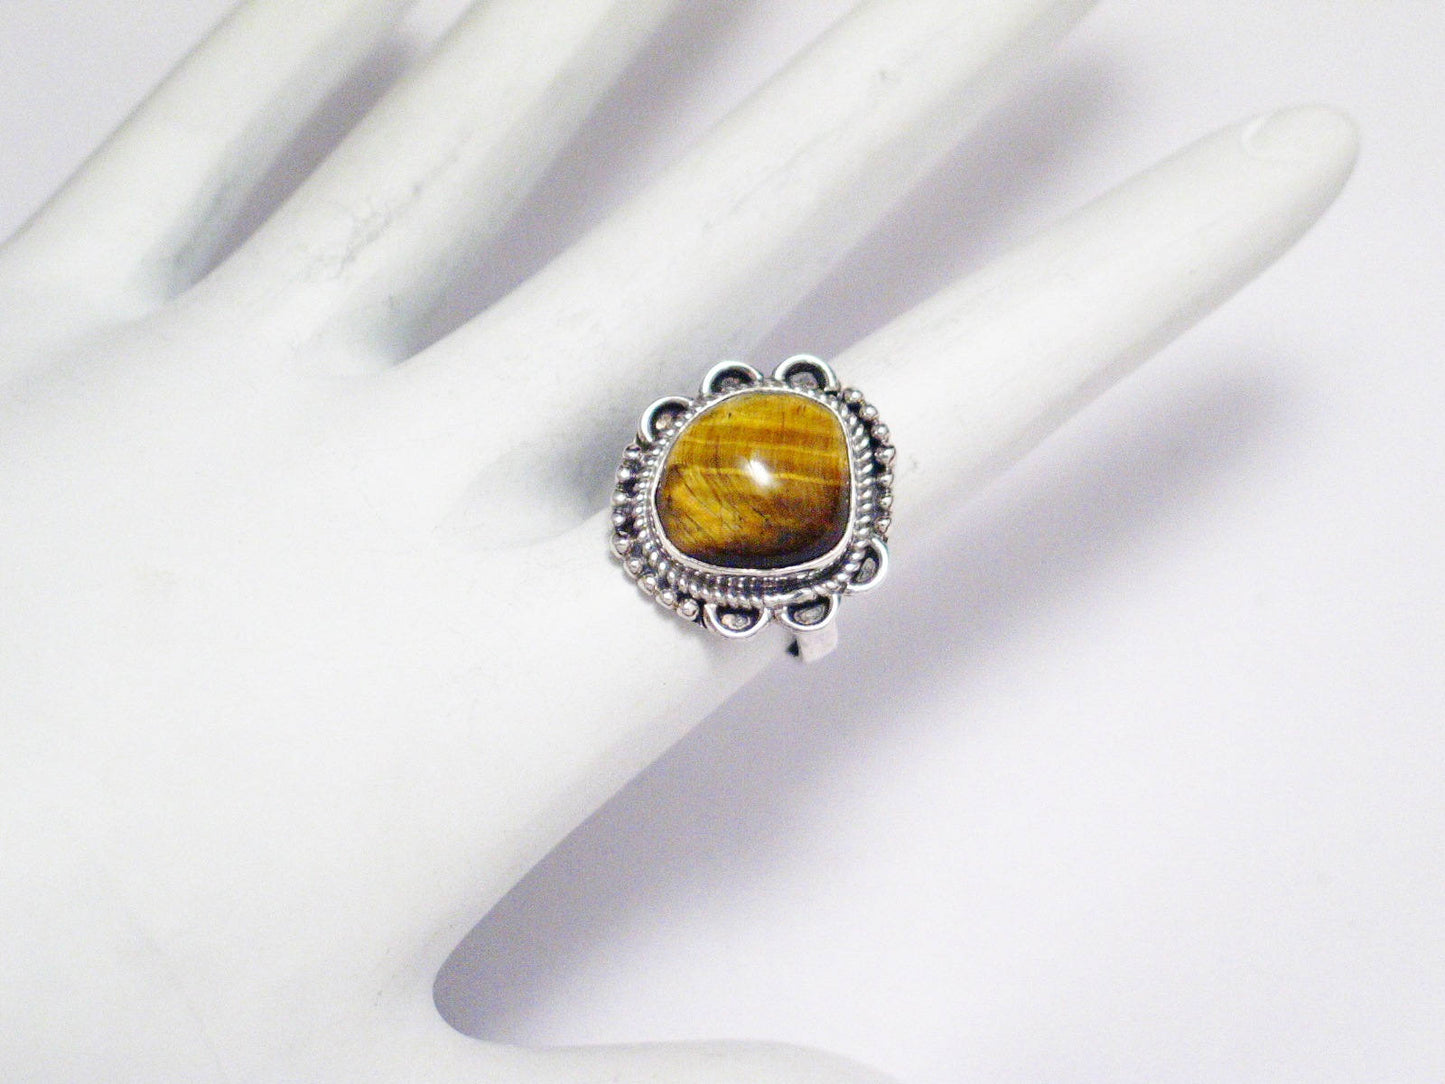 Sterling Silver Ring, Mens Womens Unique Tigers Eye Stone Solitaire Statement Ring - Blingschlingers